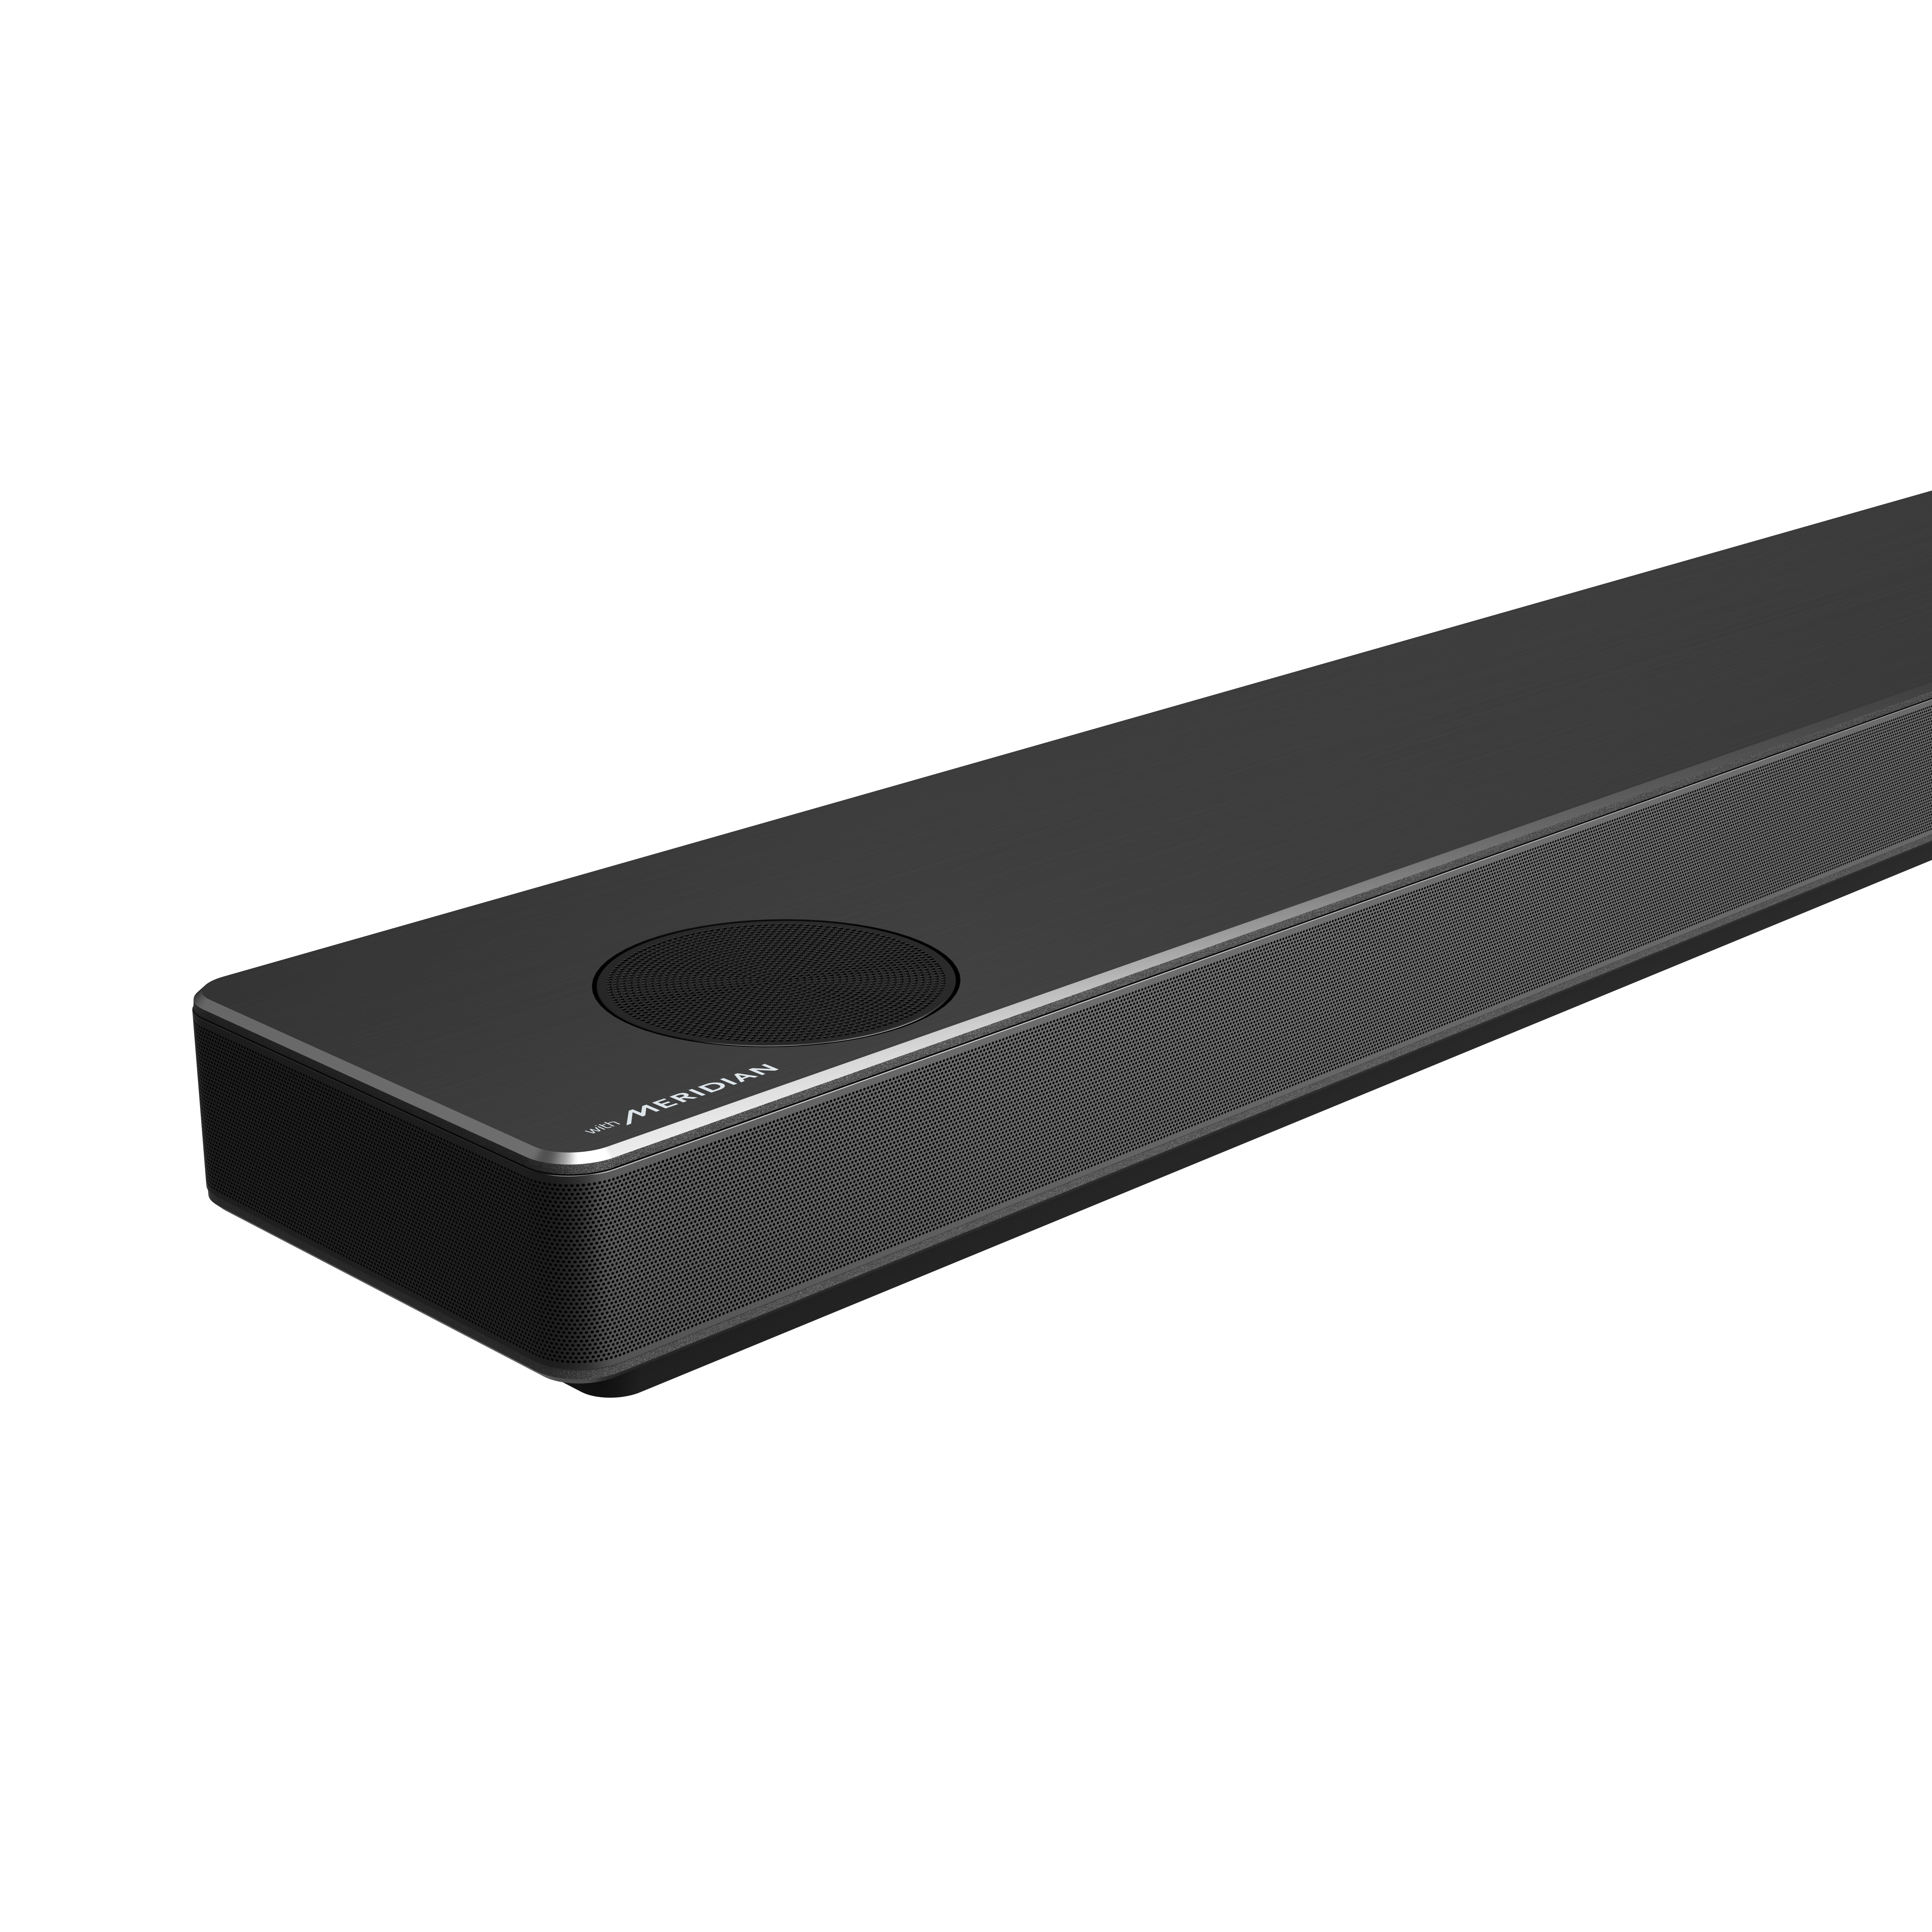 LG 7.1.4 Channel High-Res Audio Sound Bar with Dolby Atmos, Surround Speakers and Google Assistant Built-in - image 5 of 21